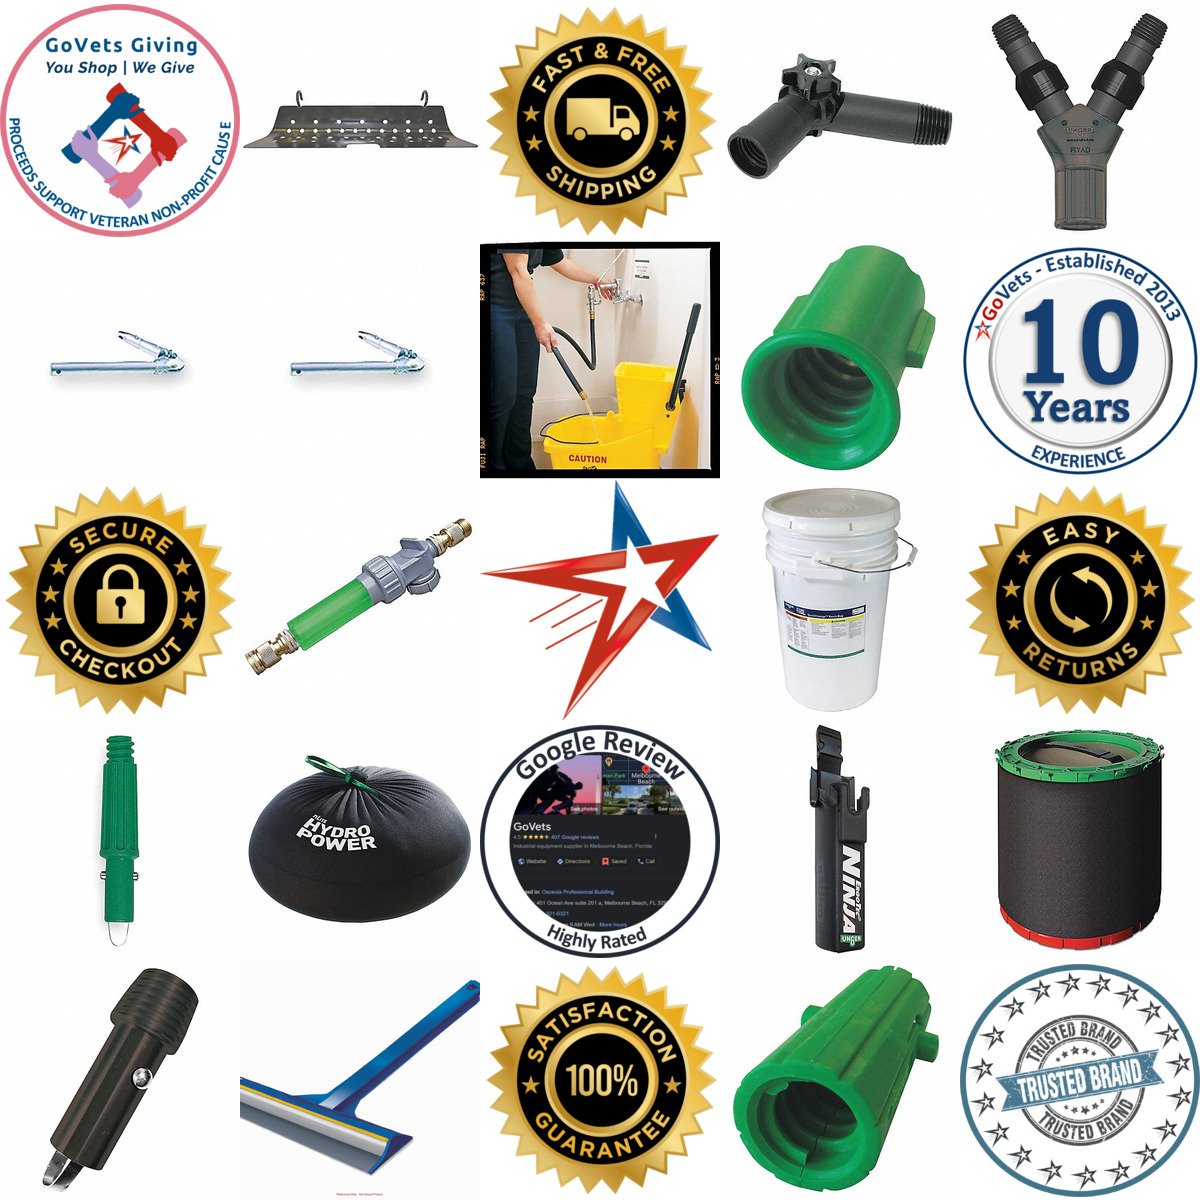 A selection of Window Washing Accessories products on GoVets